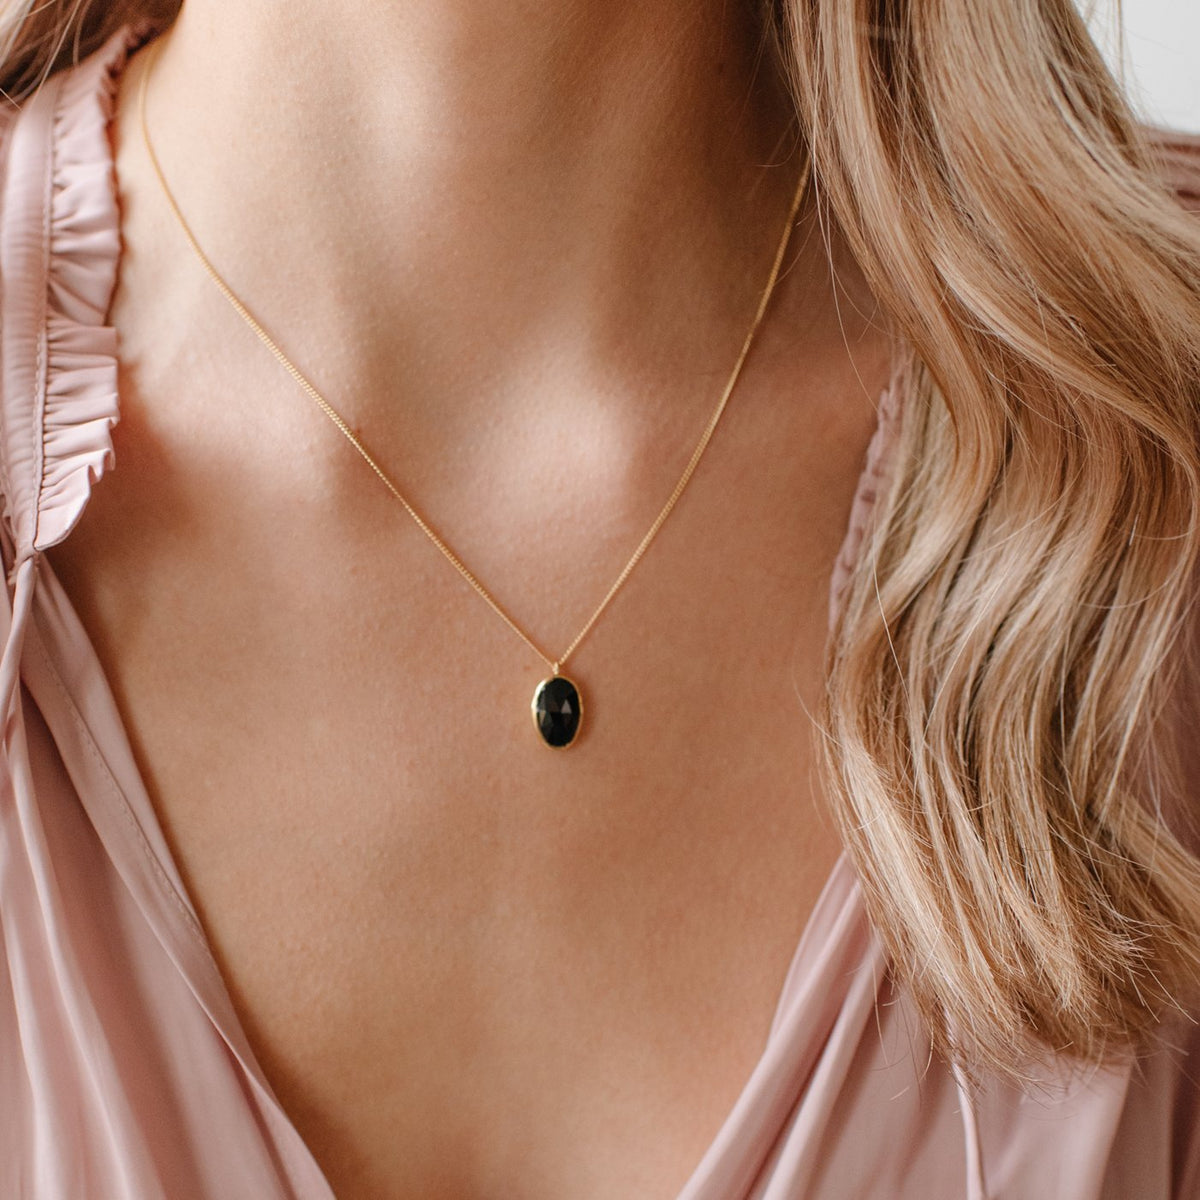 PROTECT PENDANT NECKLACE - BLACK ONYX &amp; GOLD - SO PRETTY CARA COTTER